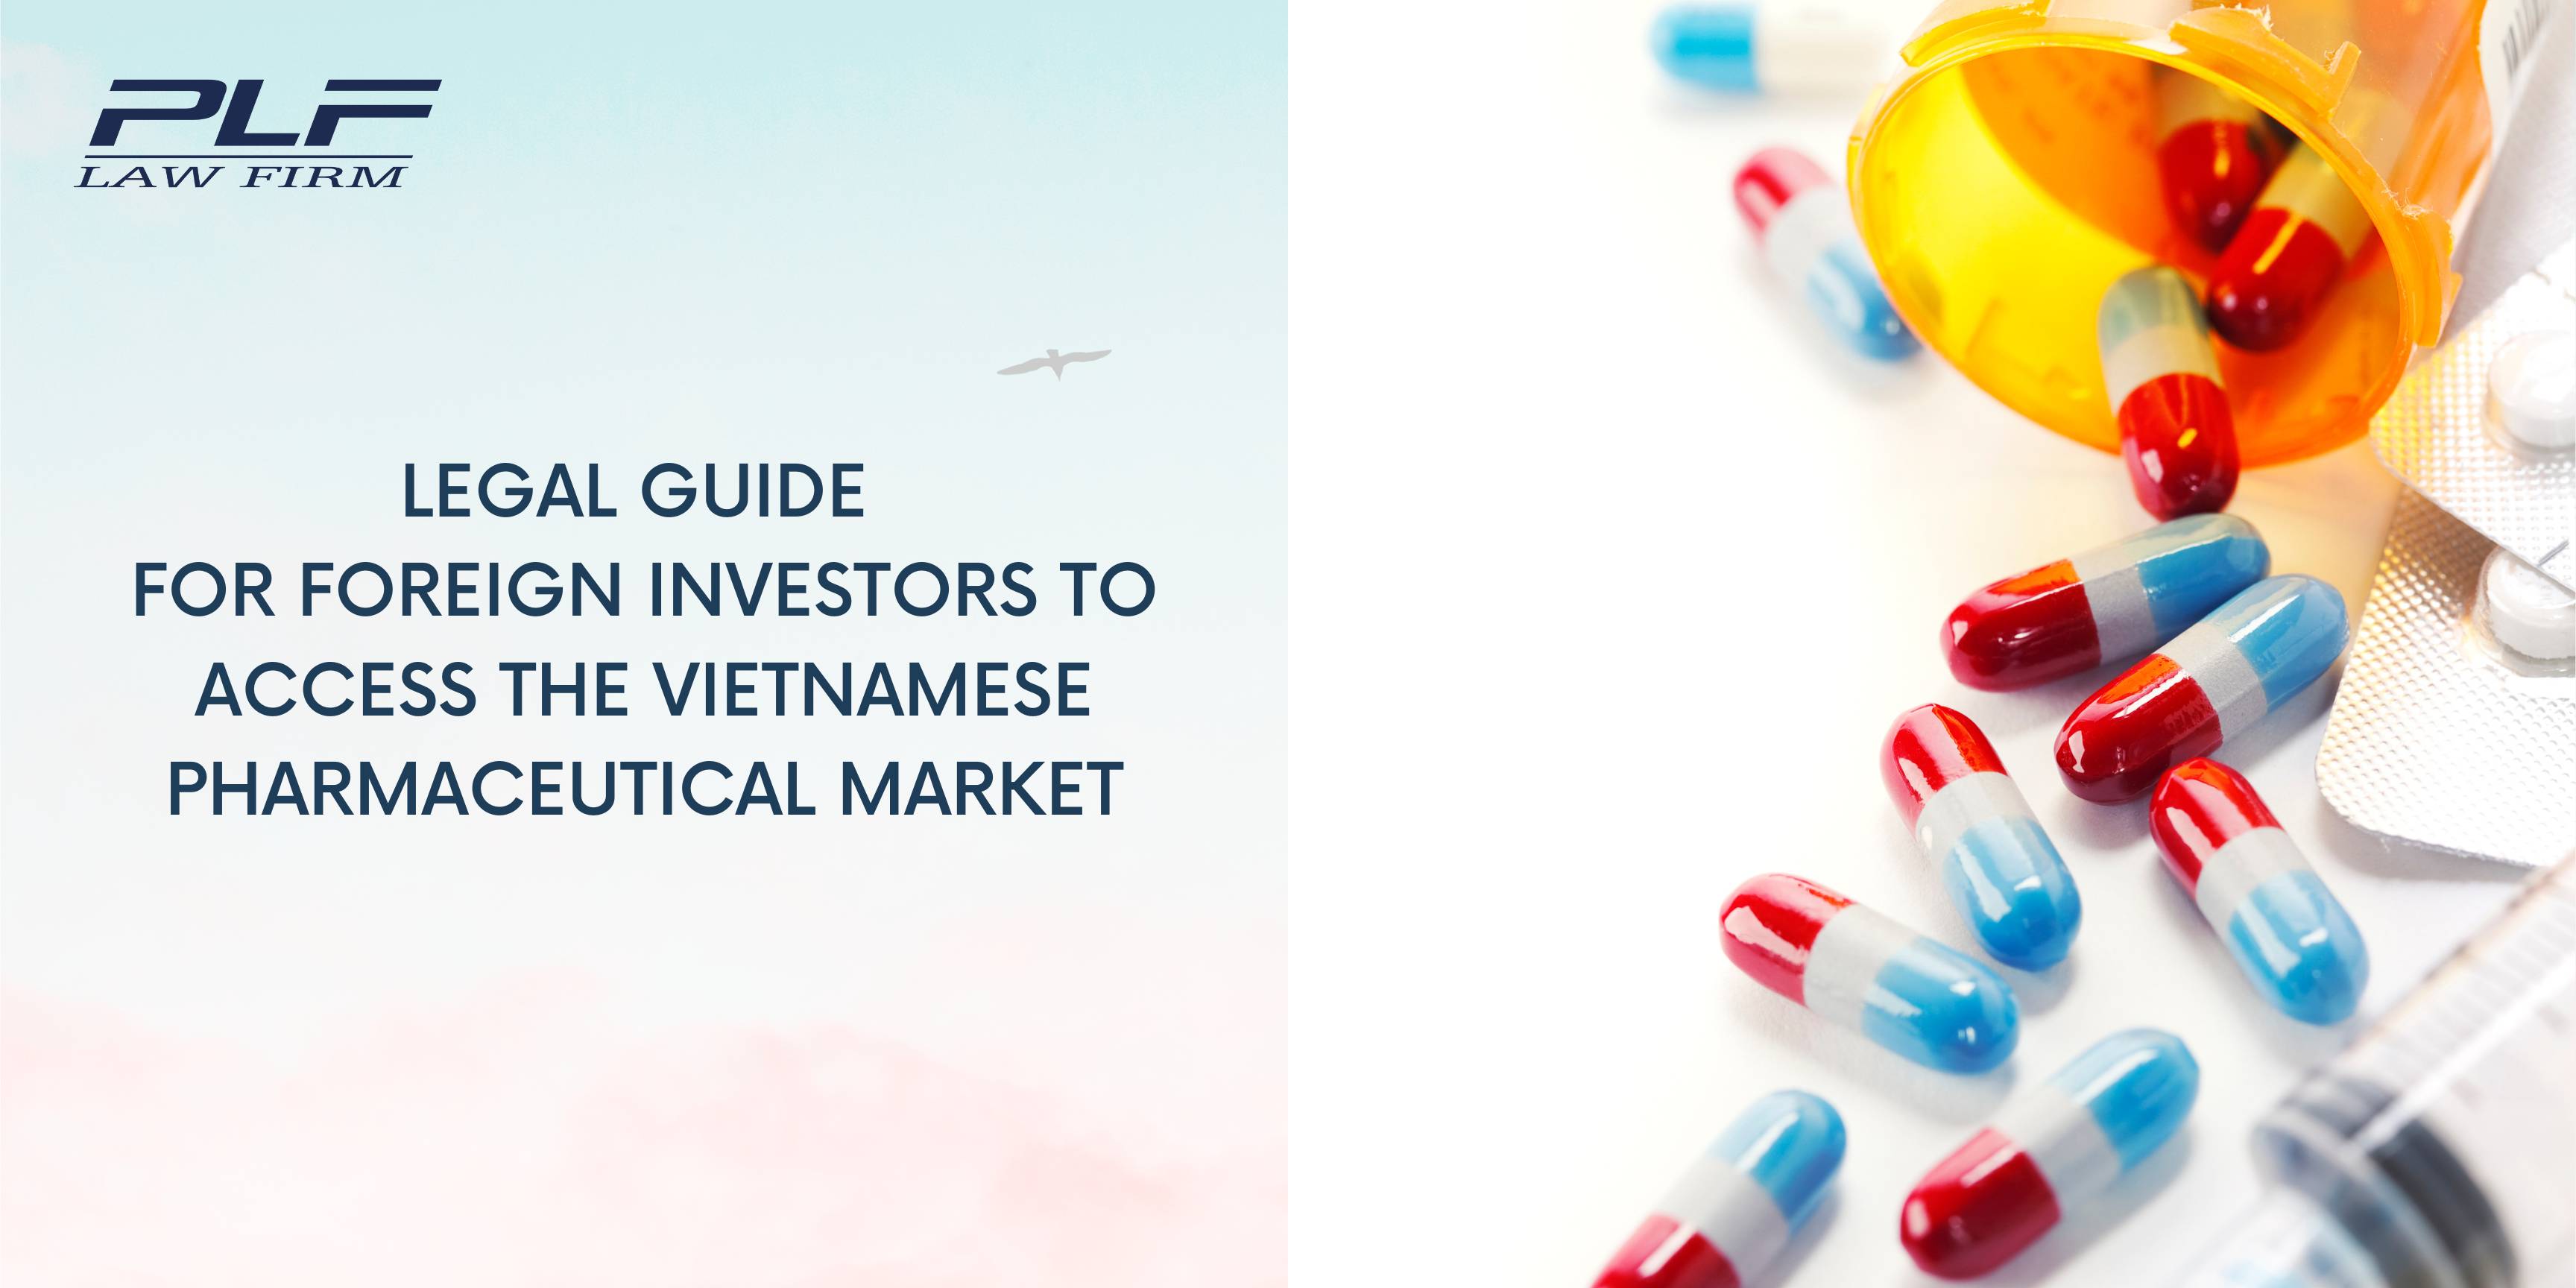 Plf Legal Guide For Foreign Investors To Access The Vietnamese Pharmaceutical Market